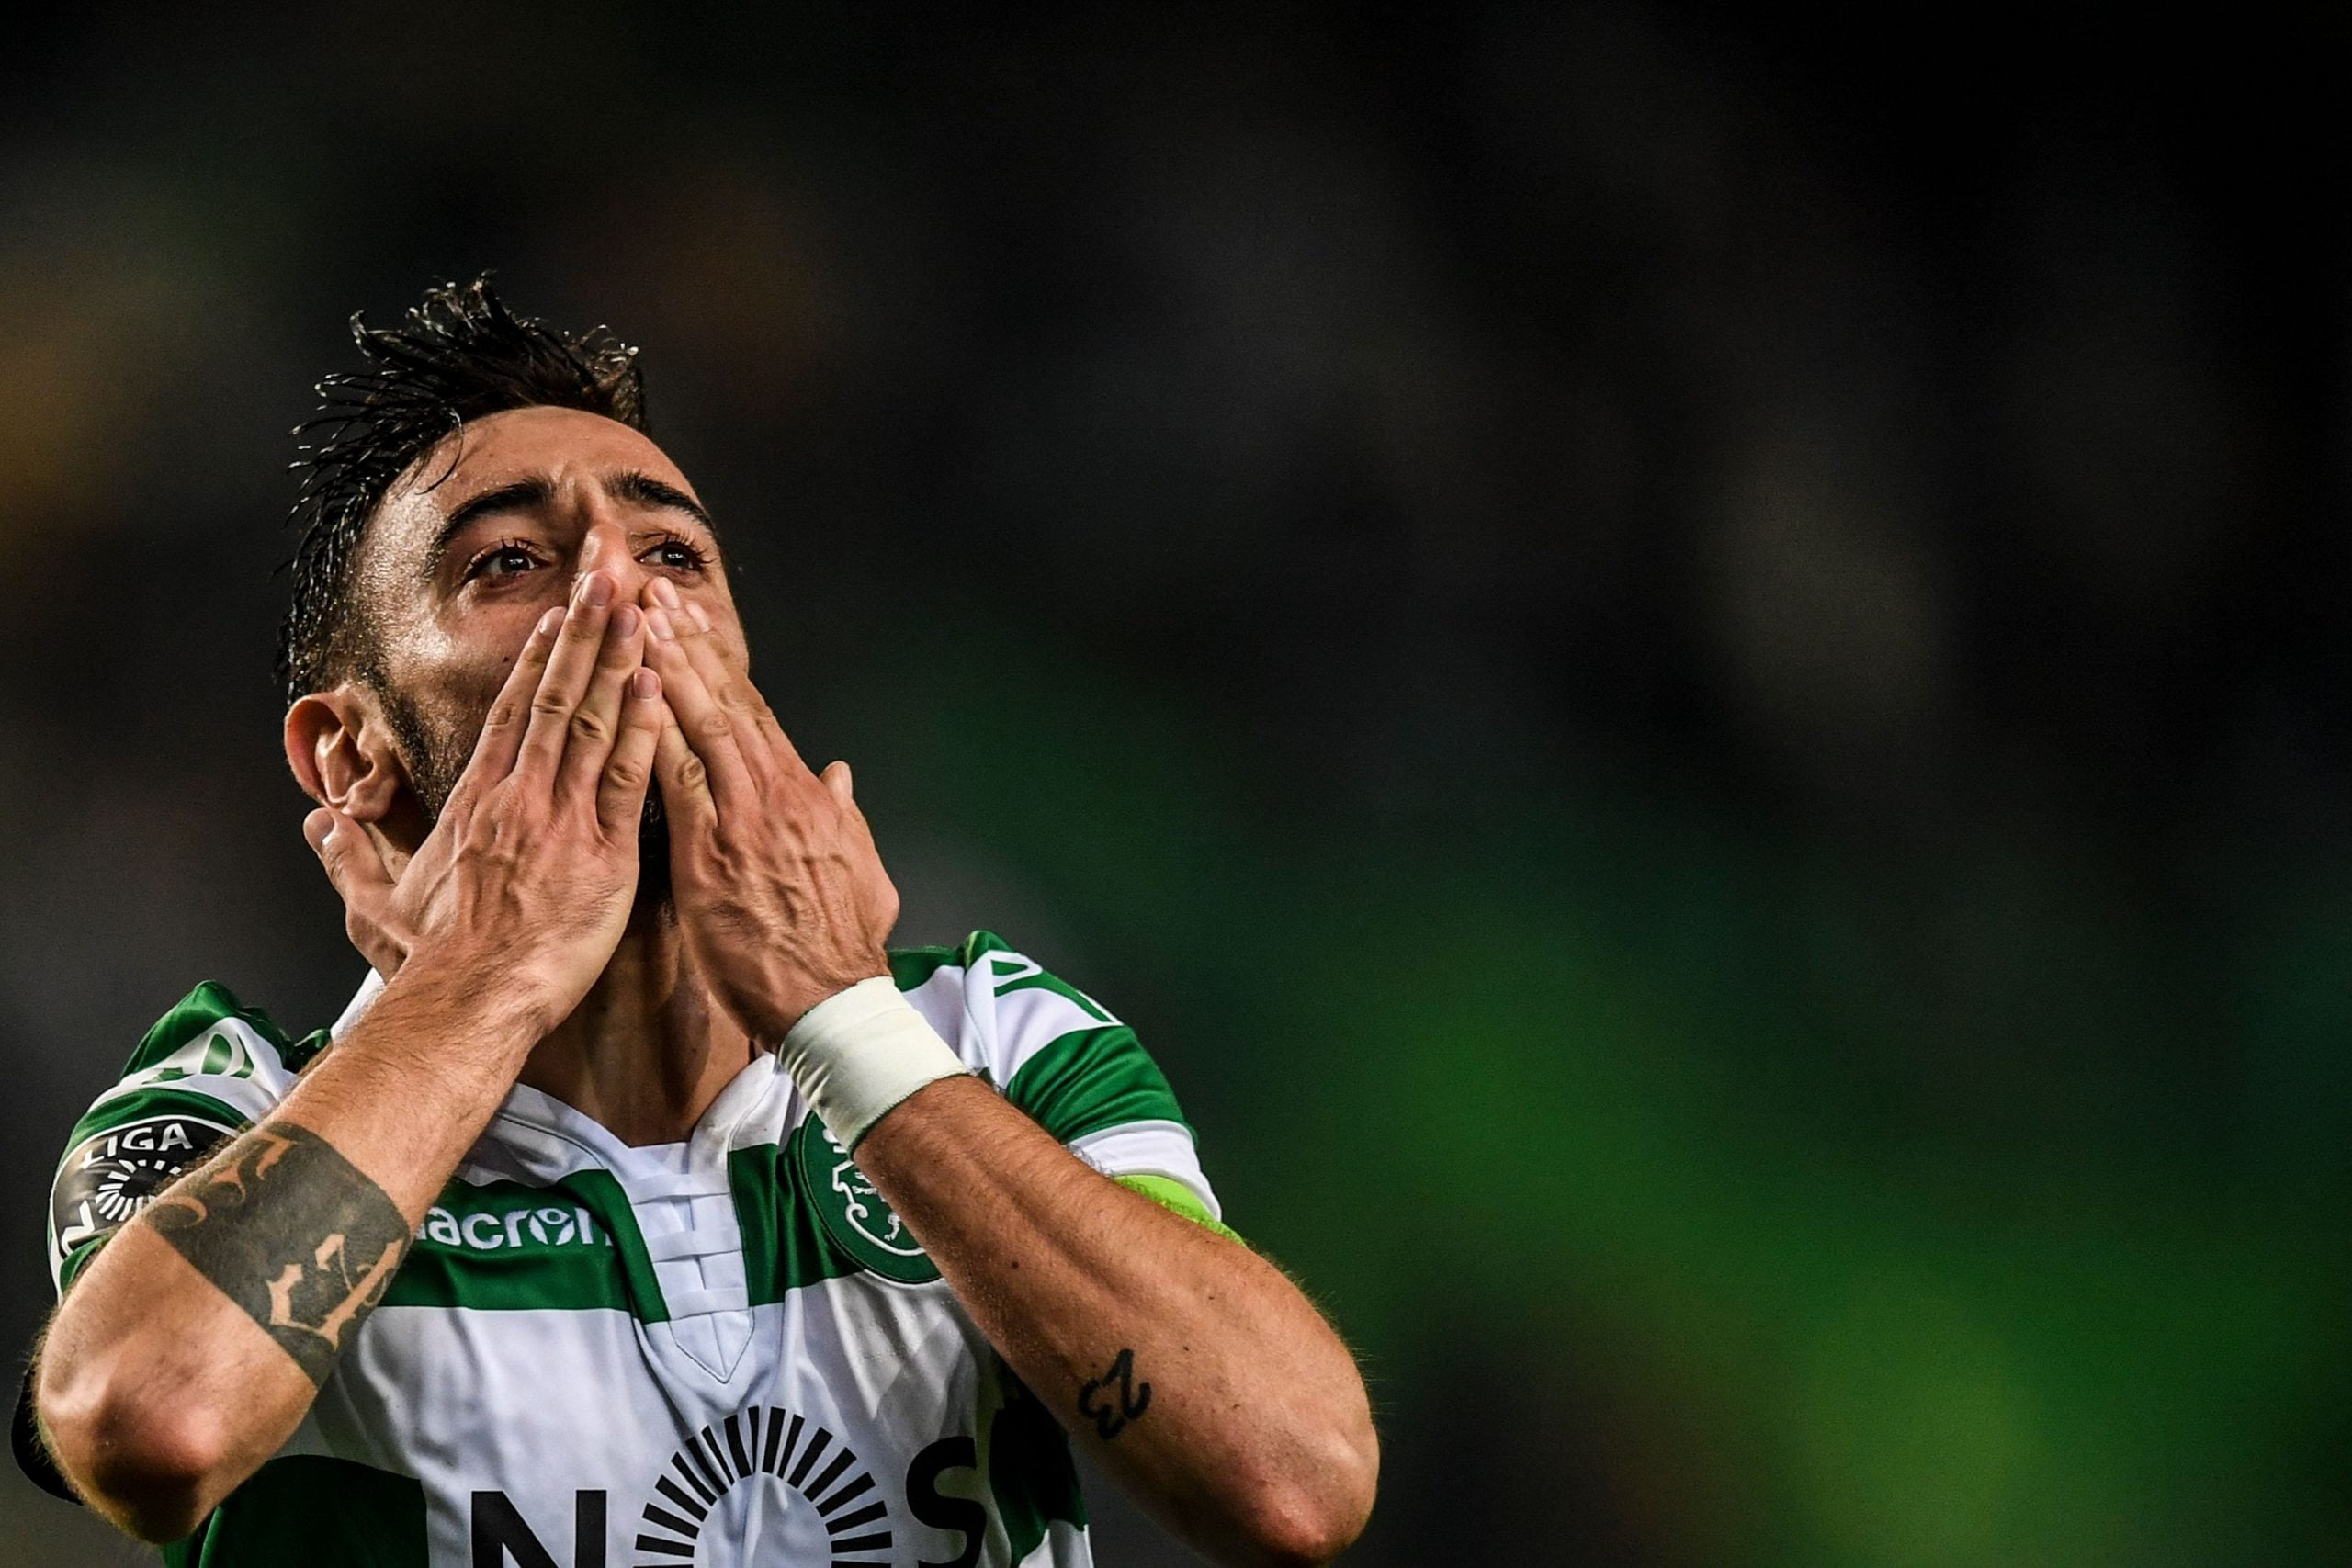 Sporting's midfielder Bruno Fernandes celebrates a goal during the Portuguese League football match between Sporting Lisbon and Nacional at the Jose Alvalade stadium in Lisbon on December 16, 2018. (Photo by PATRICIA DE MELO MOREIRA / AFP)        (Photo credit should read PATRICIA DE MELO MOREIRA/AFP/Getty Images)